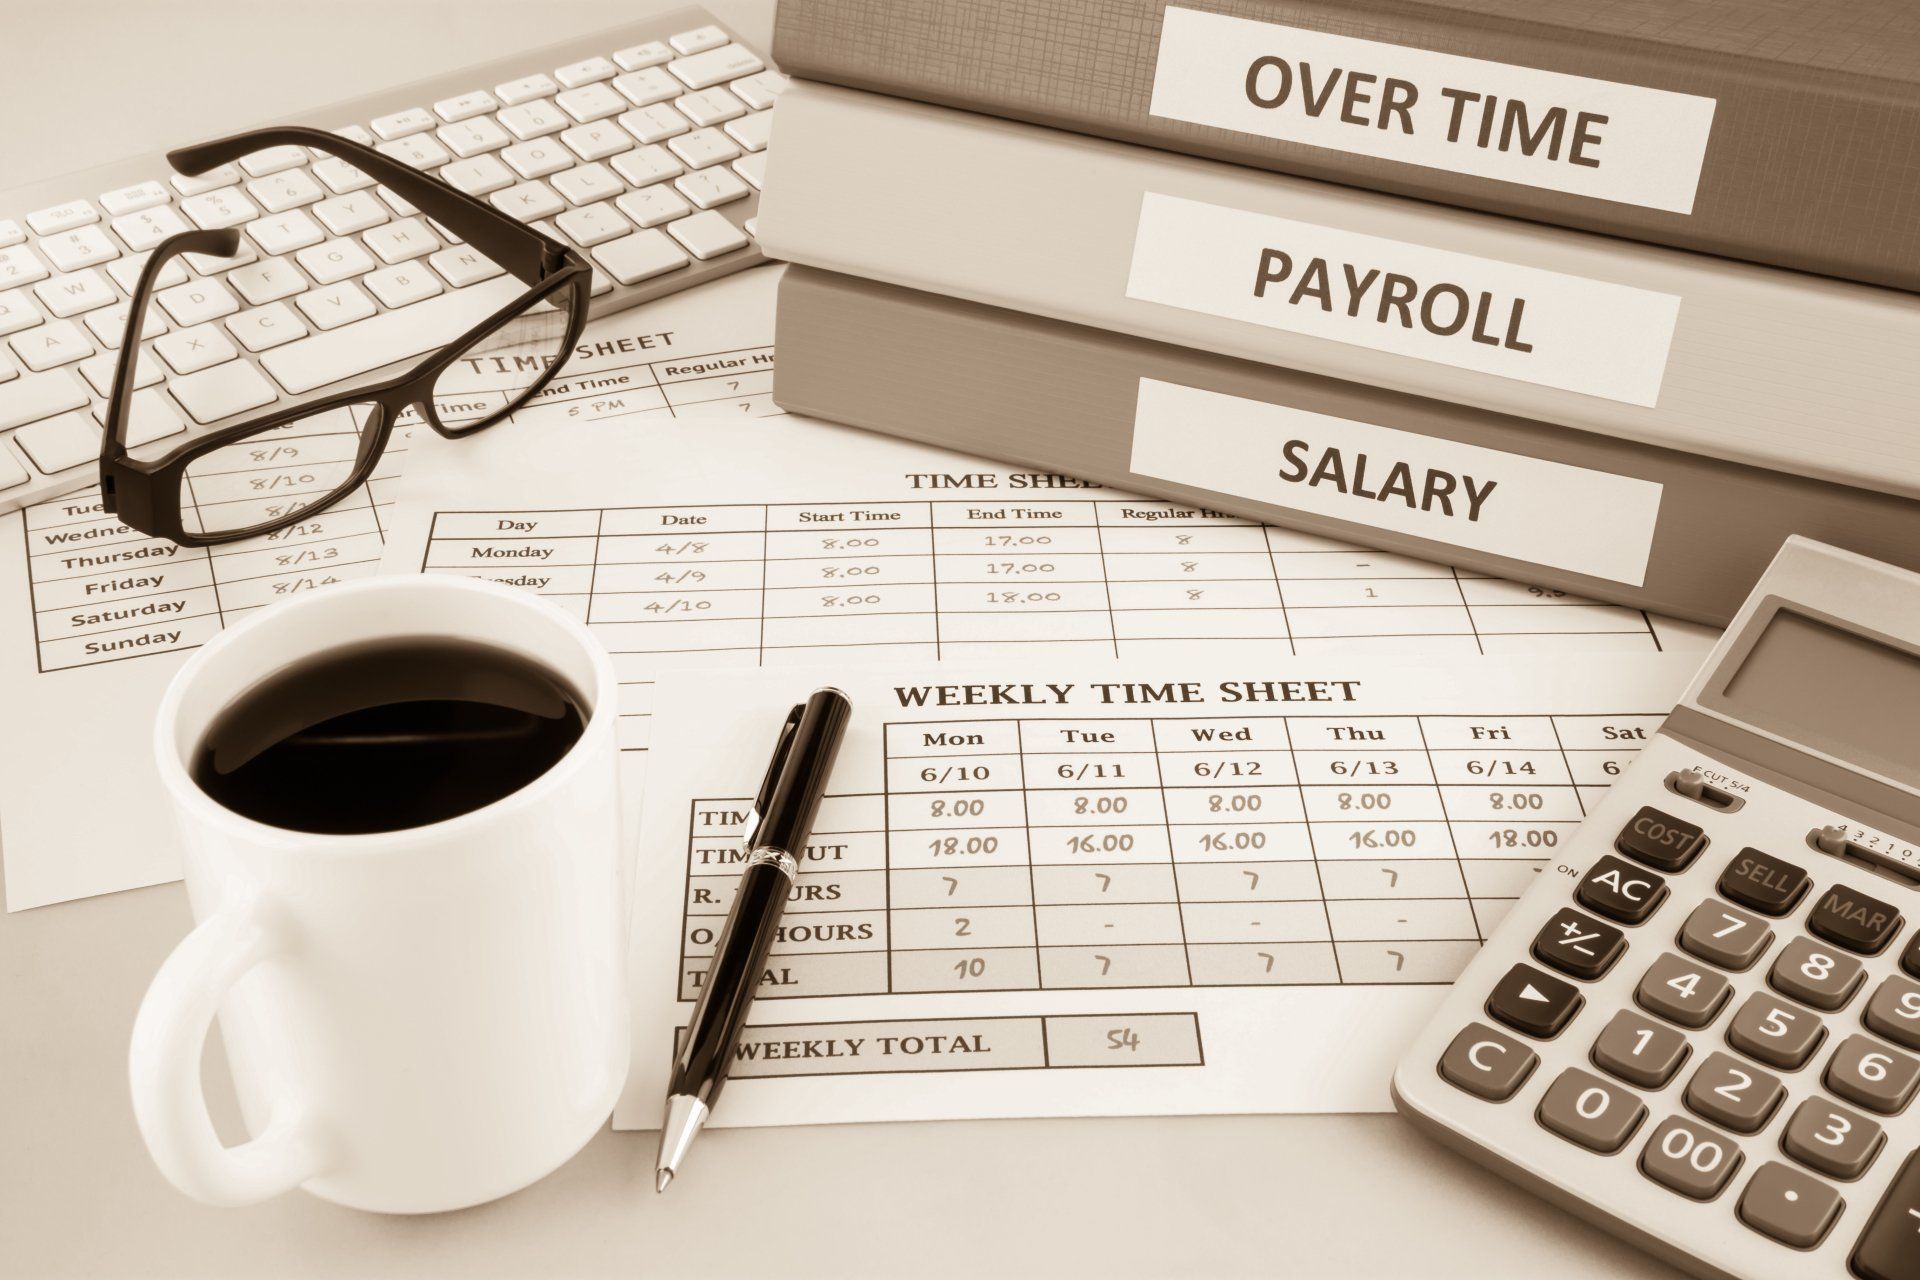 Which payroll software should I choose?